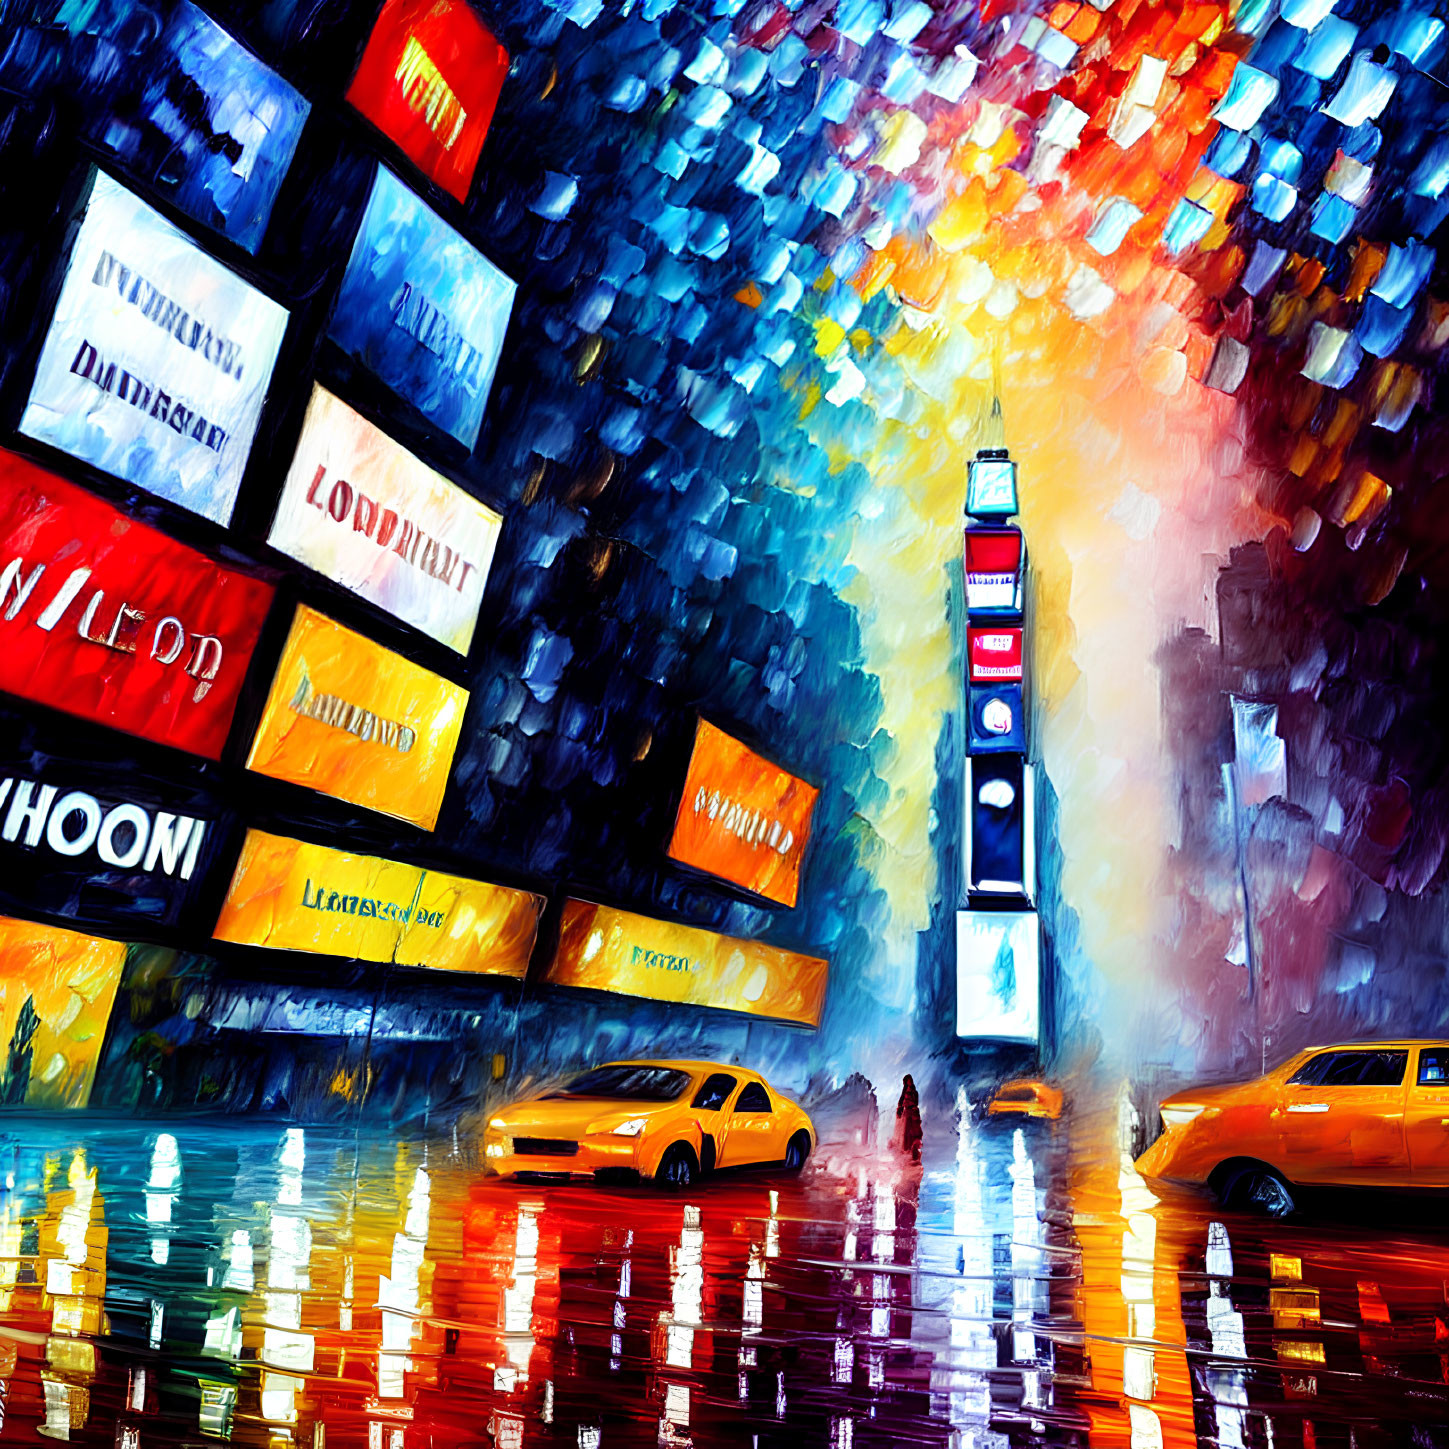 Colorful cityscape painting with billboards, tower, wet ground, and taxis